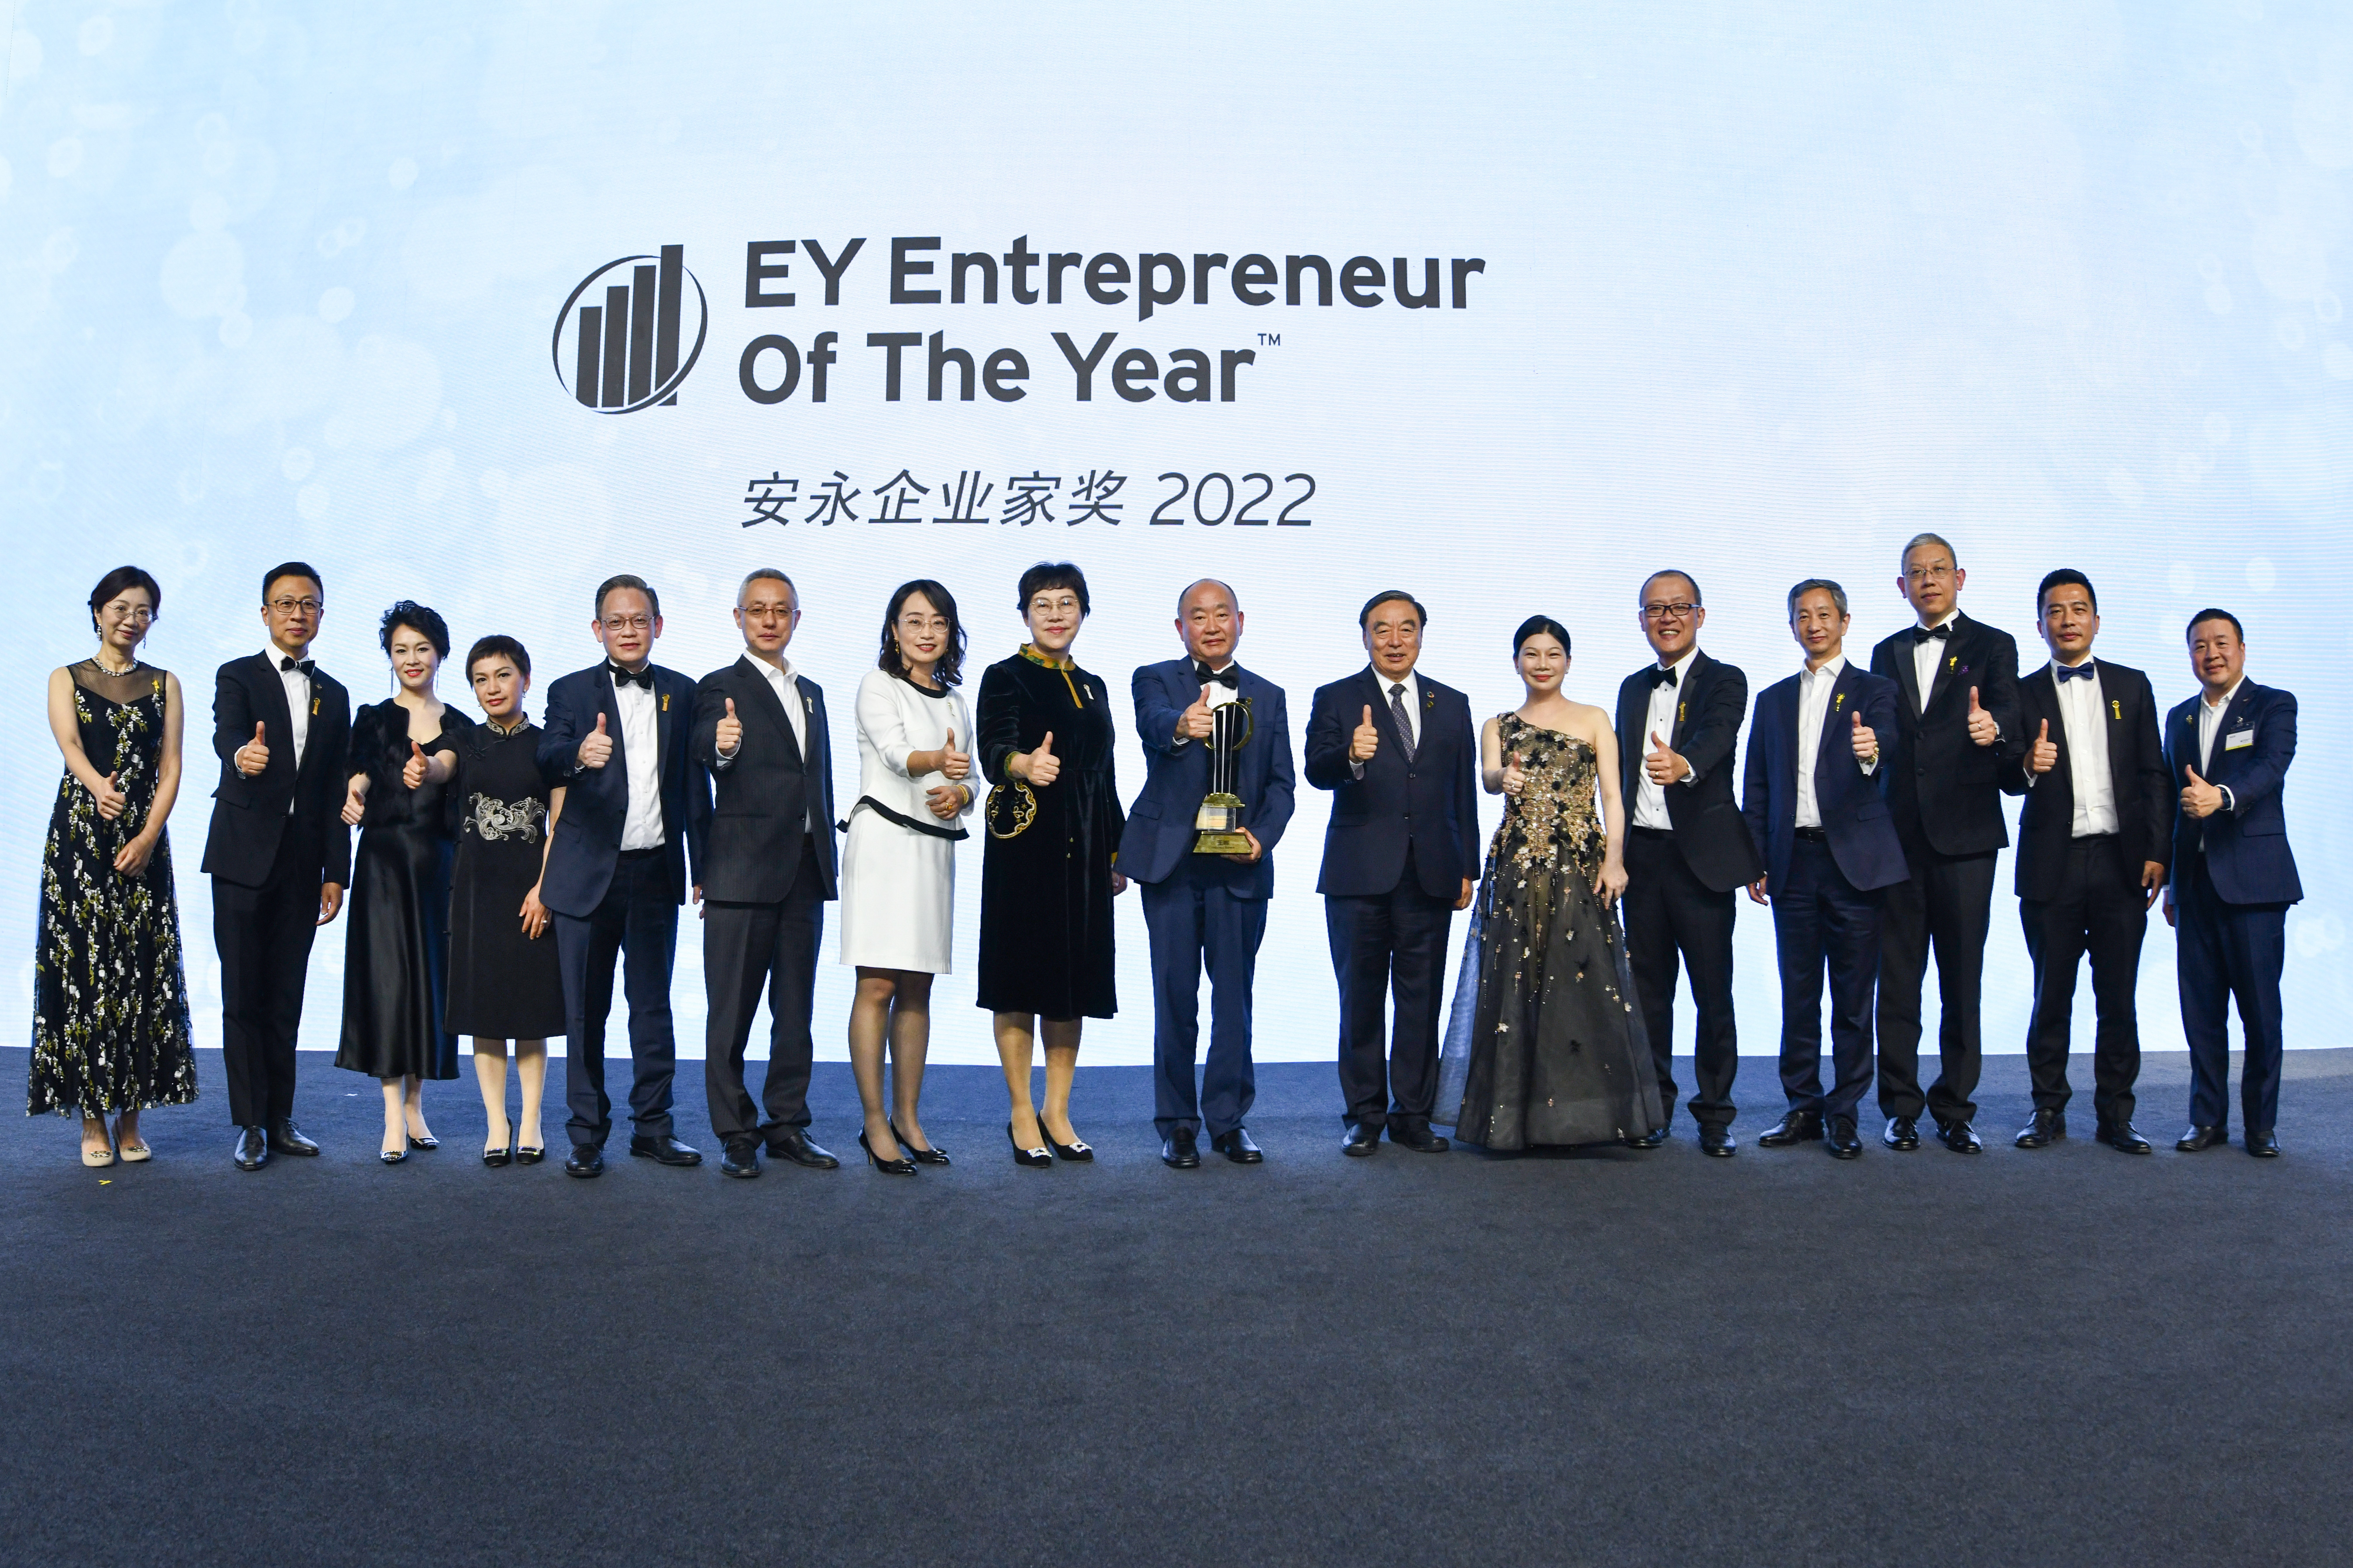 The prestigious EY Entrepreneur of the Year Awards 2022 held its awards ceremony recently in Shenzhen.
